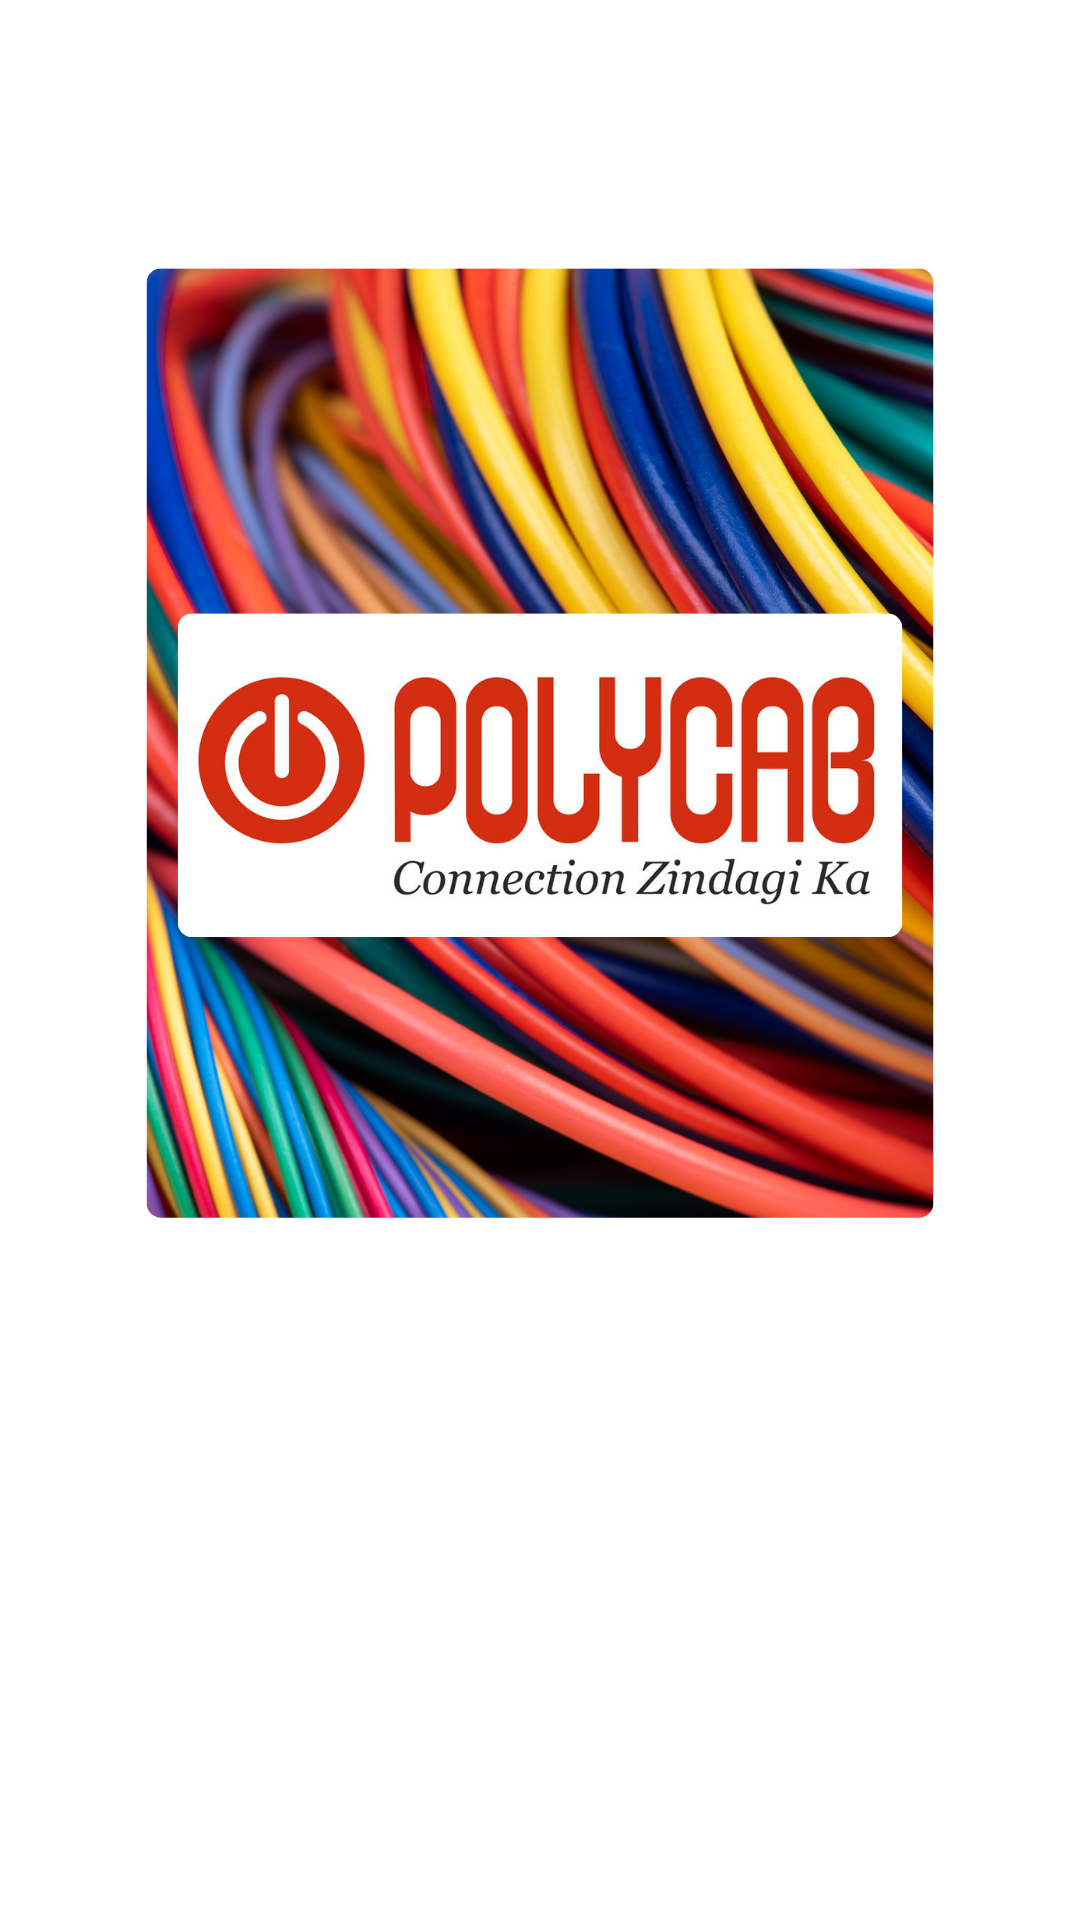 Madison Media Infinity wins the Media AOR of Polycab India Ltd. -  Passionate In Marketing